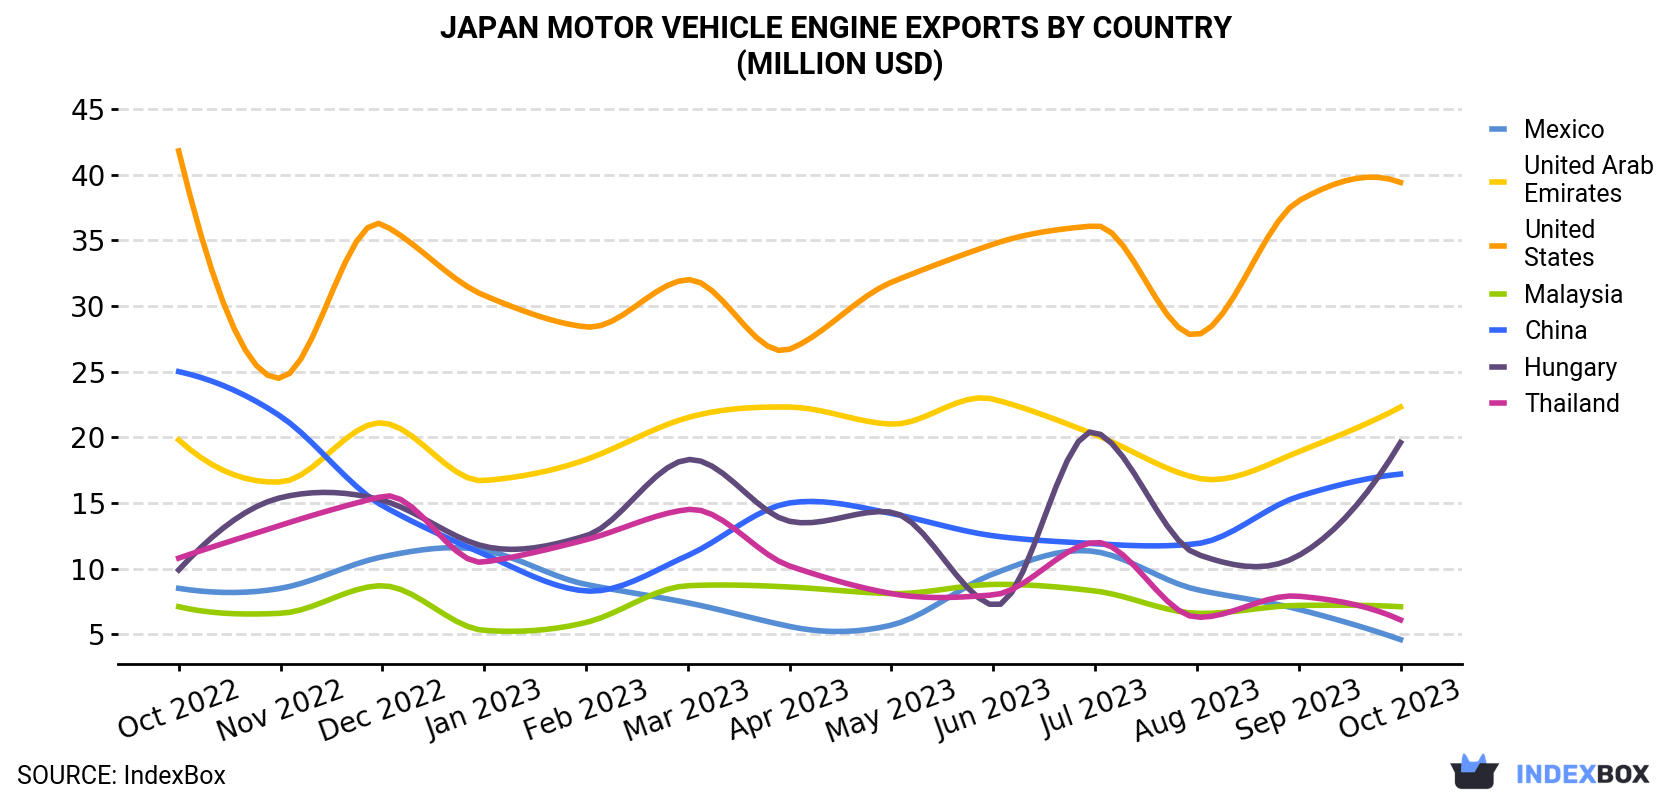 Japan Motor Vehicle Engine Exports By Country (Million USD)